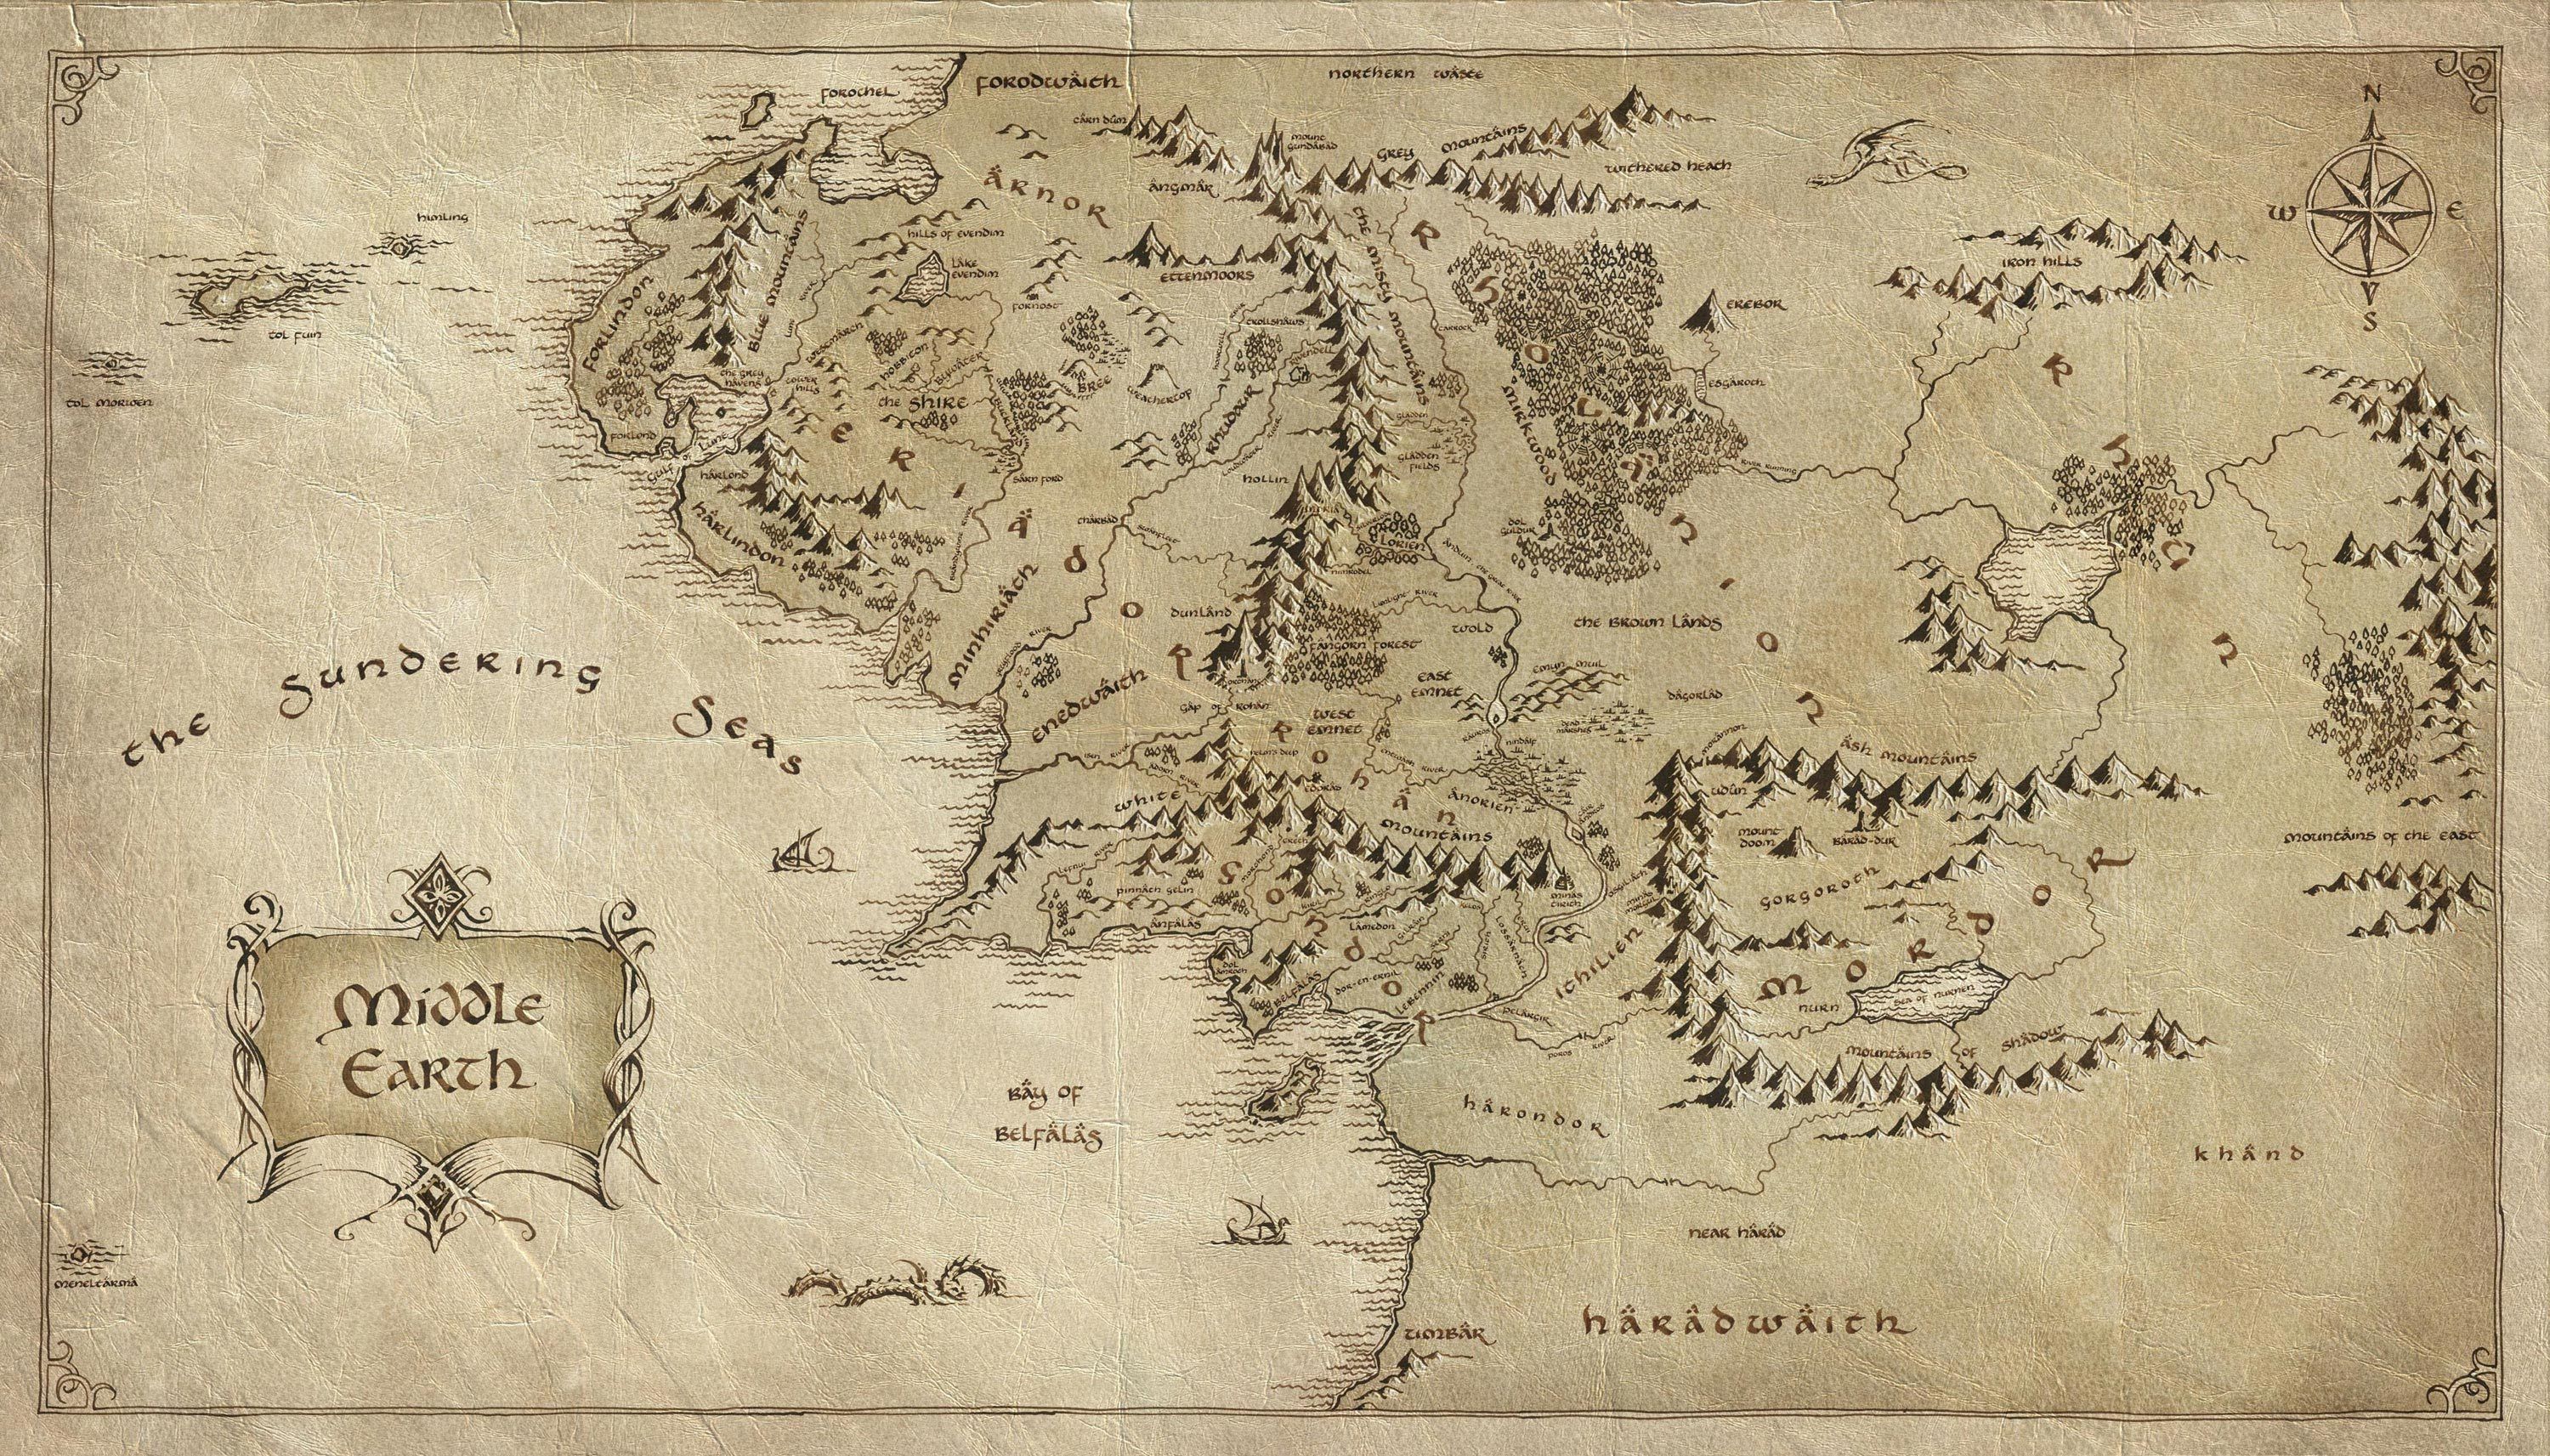 Lord of the Rings Map Wallpaper Free Lord of the Rings Map Background